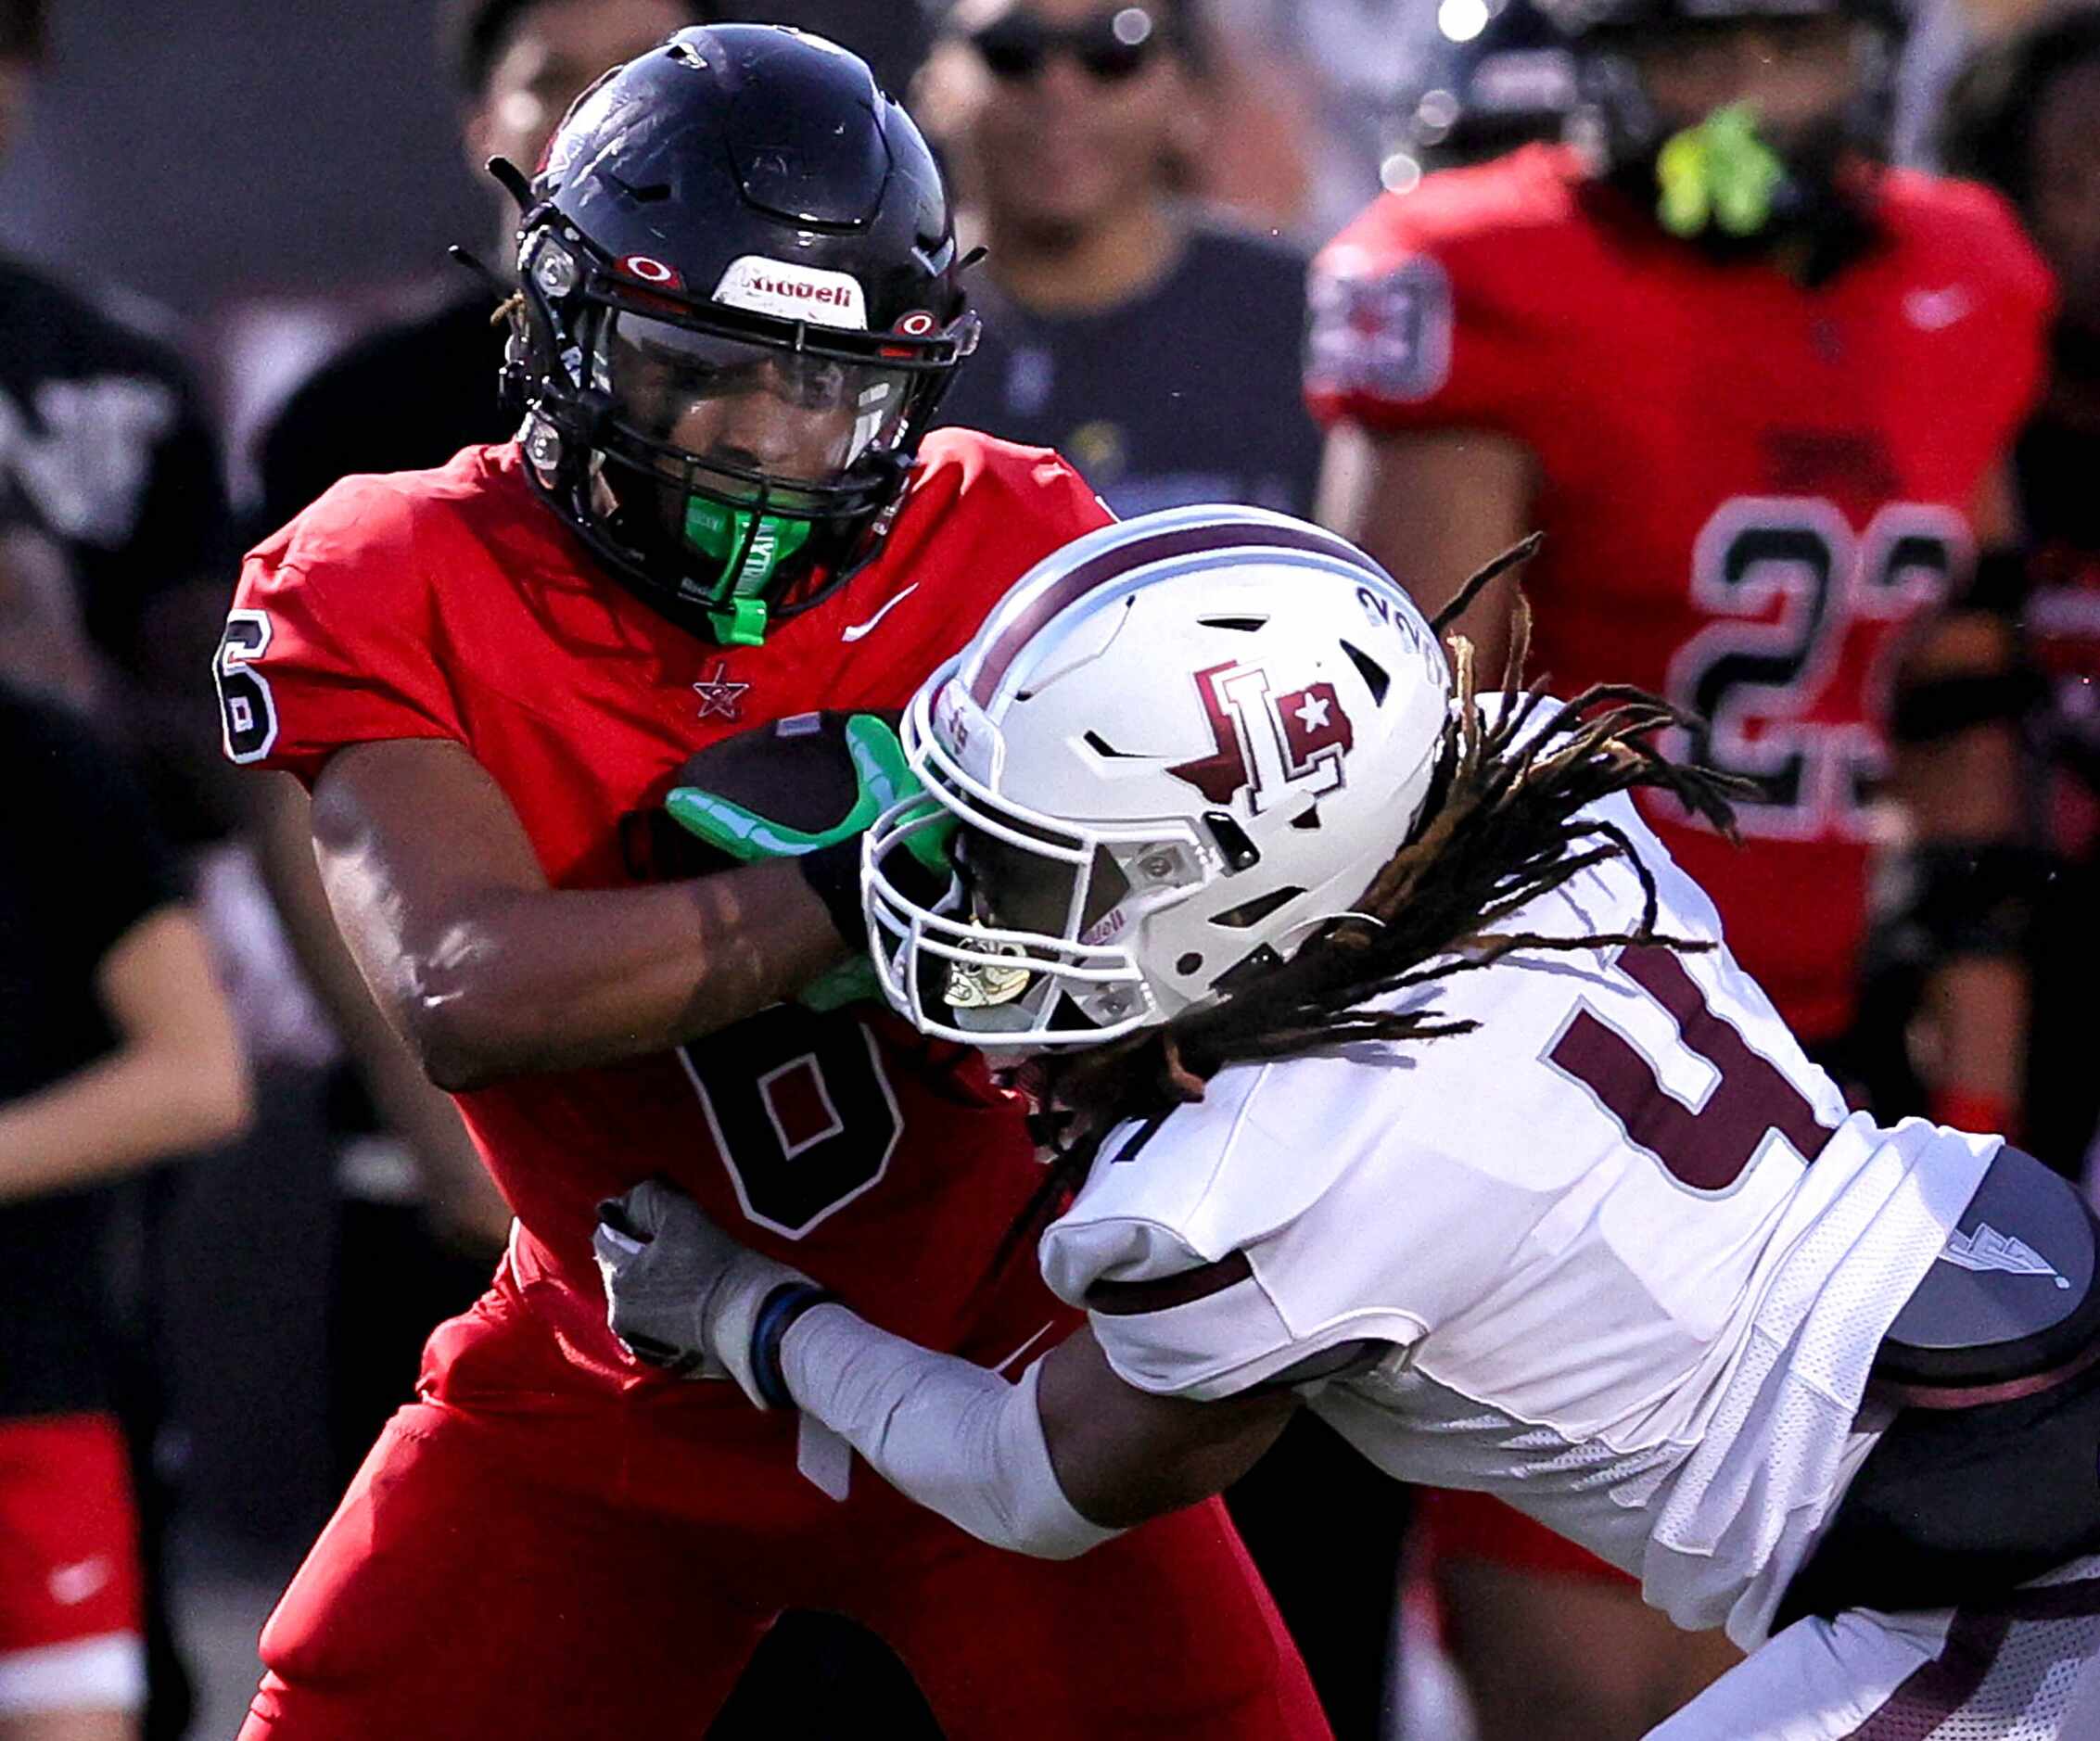 Coppell running back O'Marion Mbakwe (6) gets a hard hit by Lewisville defensive back...